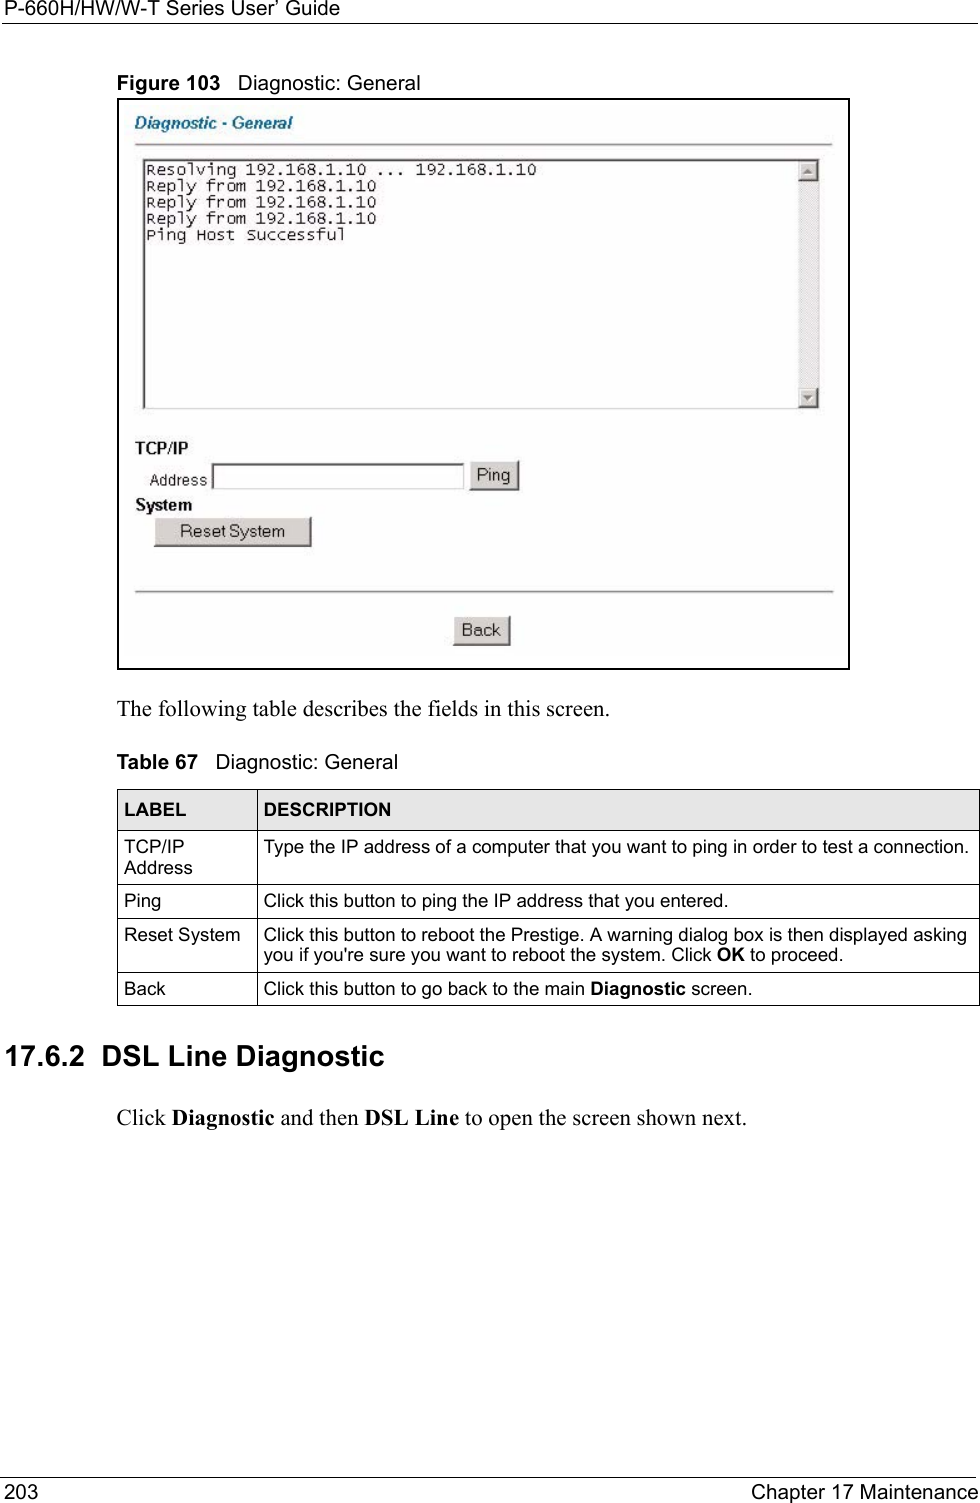 P-660H/HW/W-T Series User’ Guide203 Chapter 17 MaintenanceFigure 103   Diagnostic: GeneralThe following table describes the fields in this screen. 17.6.2  DSL Line Diagnostic   Click Diagnostic and then DSL Line to open the screen shown next.Table 67   Diagnostic: GeneralLABEL DESCRIPTIONTCP/IP AddressType the IP address of a computer that you want to ping in order to test a connection.Ping Click this button to ping the IP address that you entered.Reset System  Click this button to reboot the Prestige. A warning dialog box is then displayed asking you if you&apos;re sure you want to reboot the system. Click OK to proceed.Back Click this button to go back to the main Diagnostic screen.